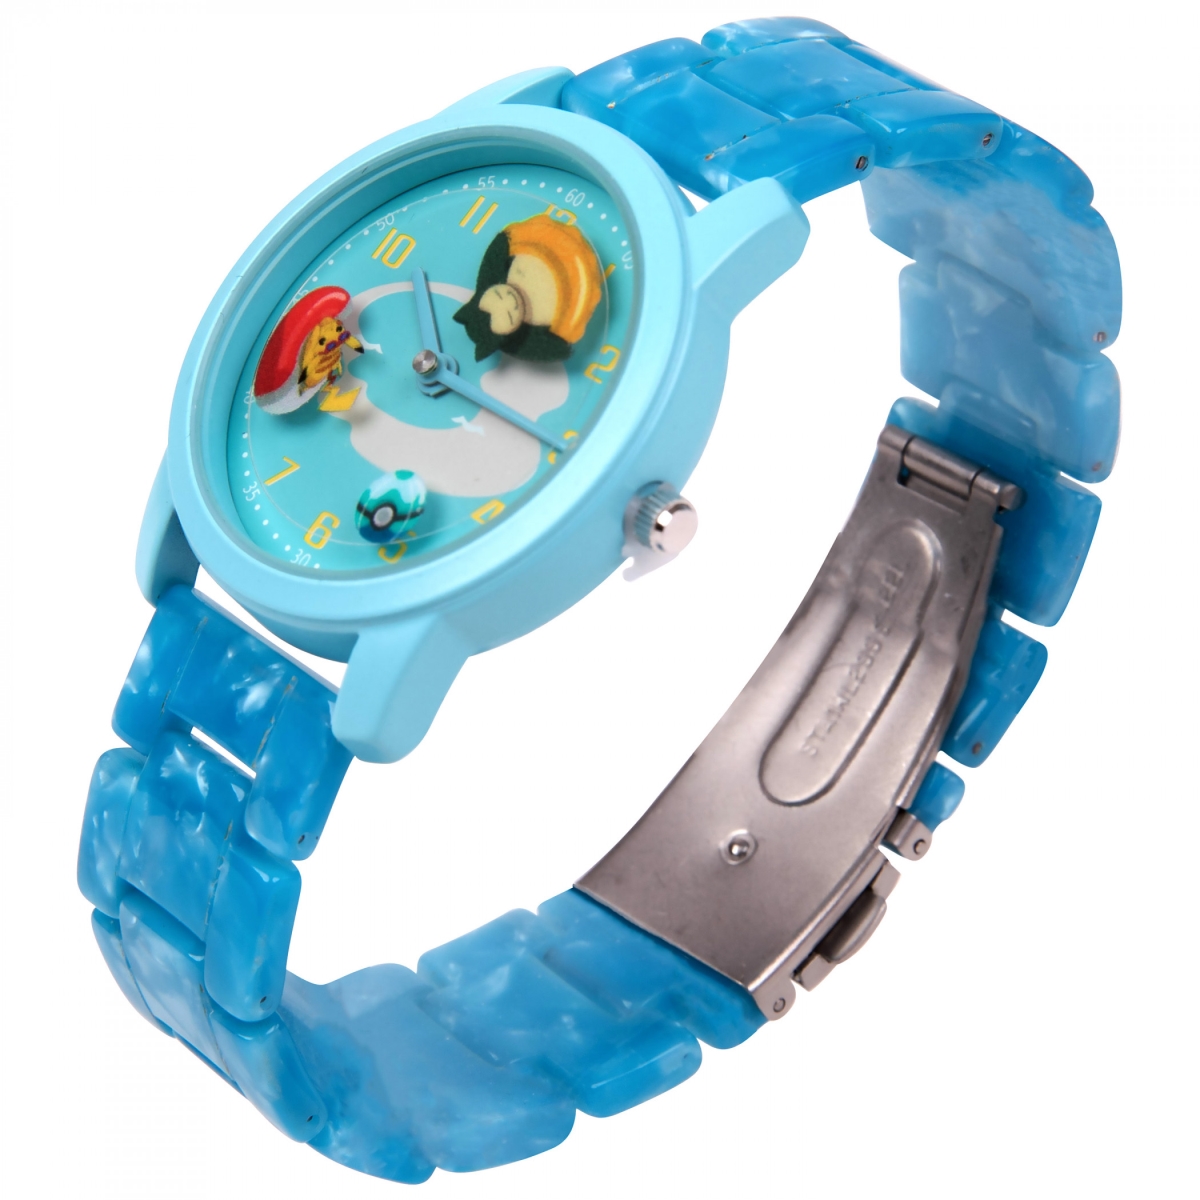 JUGUETE Water Fun Time Watch with Rotating Watch Face